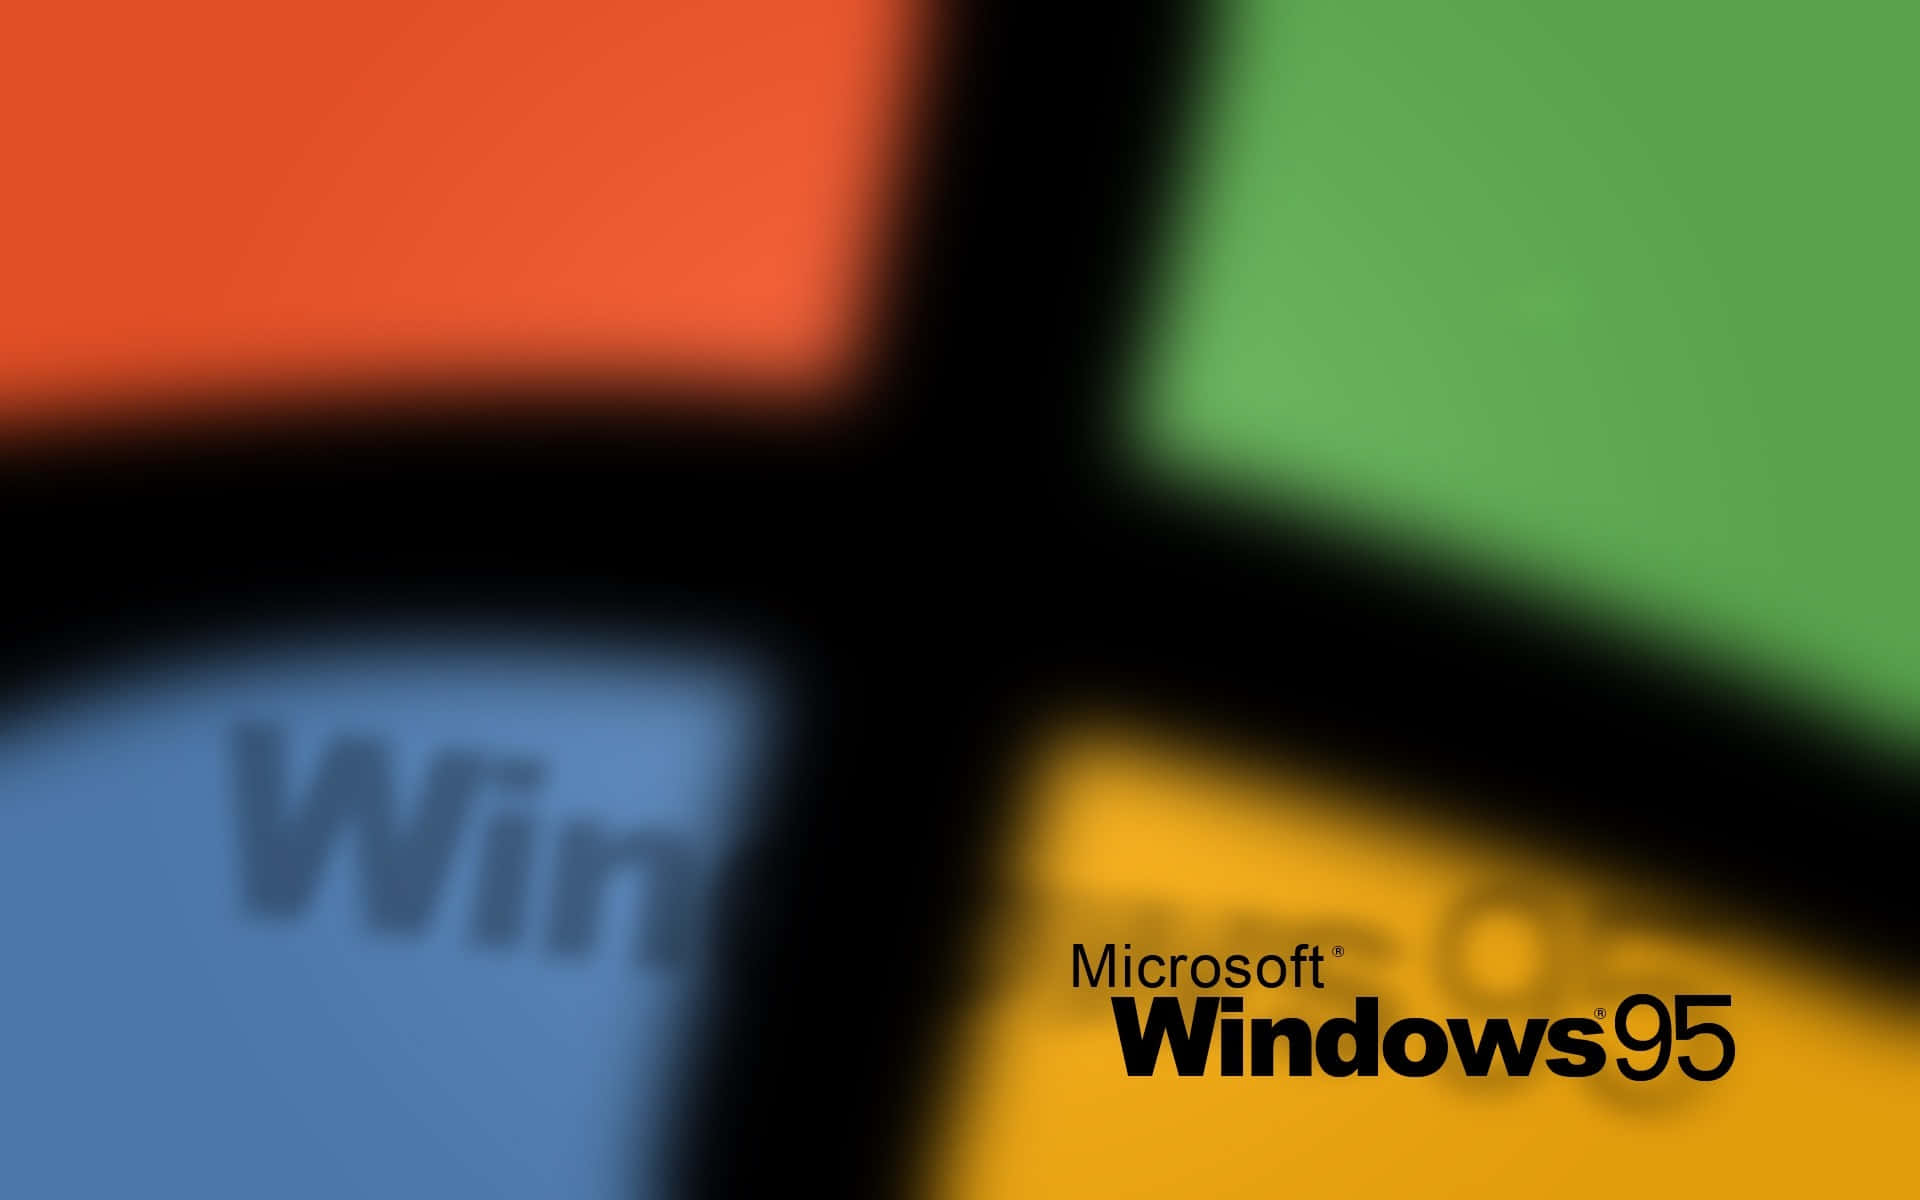 Relive the Nostalgic Experience of Windows 95